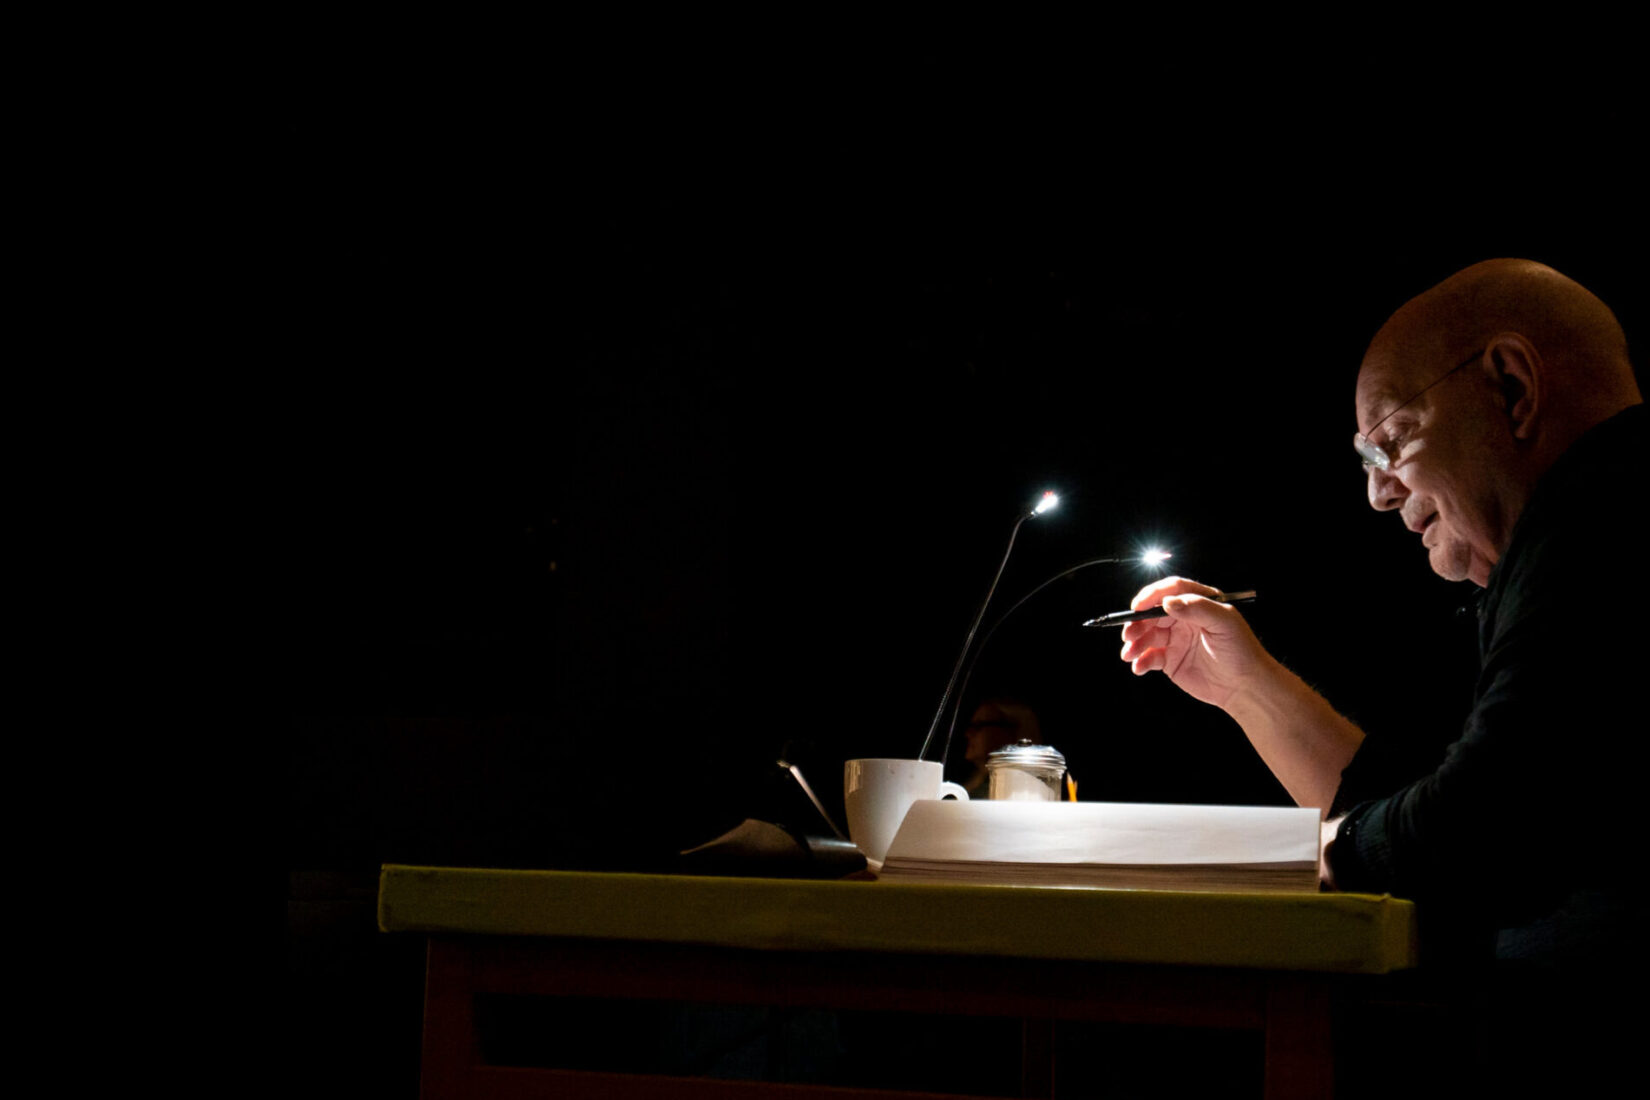 Photo of Lars Norén writing at his desk in the dark.